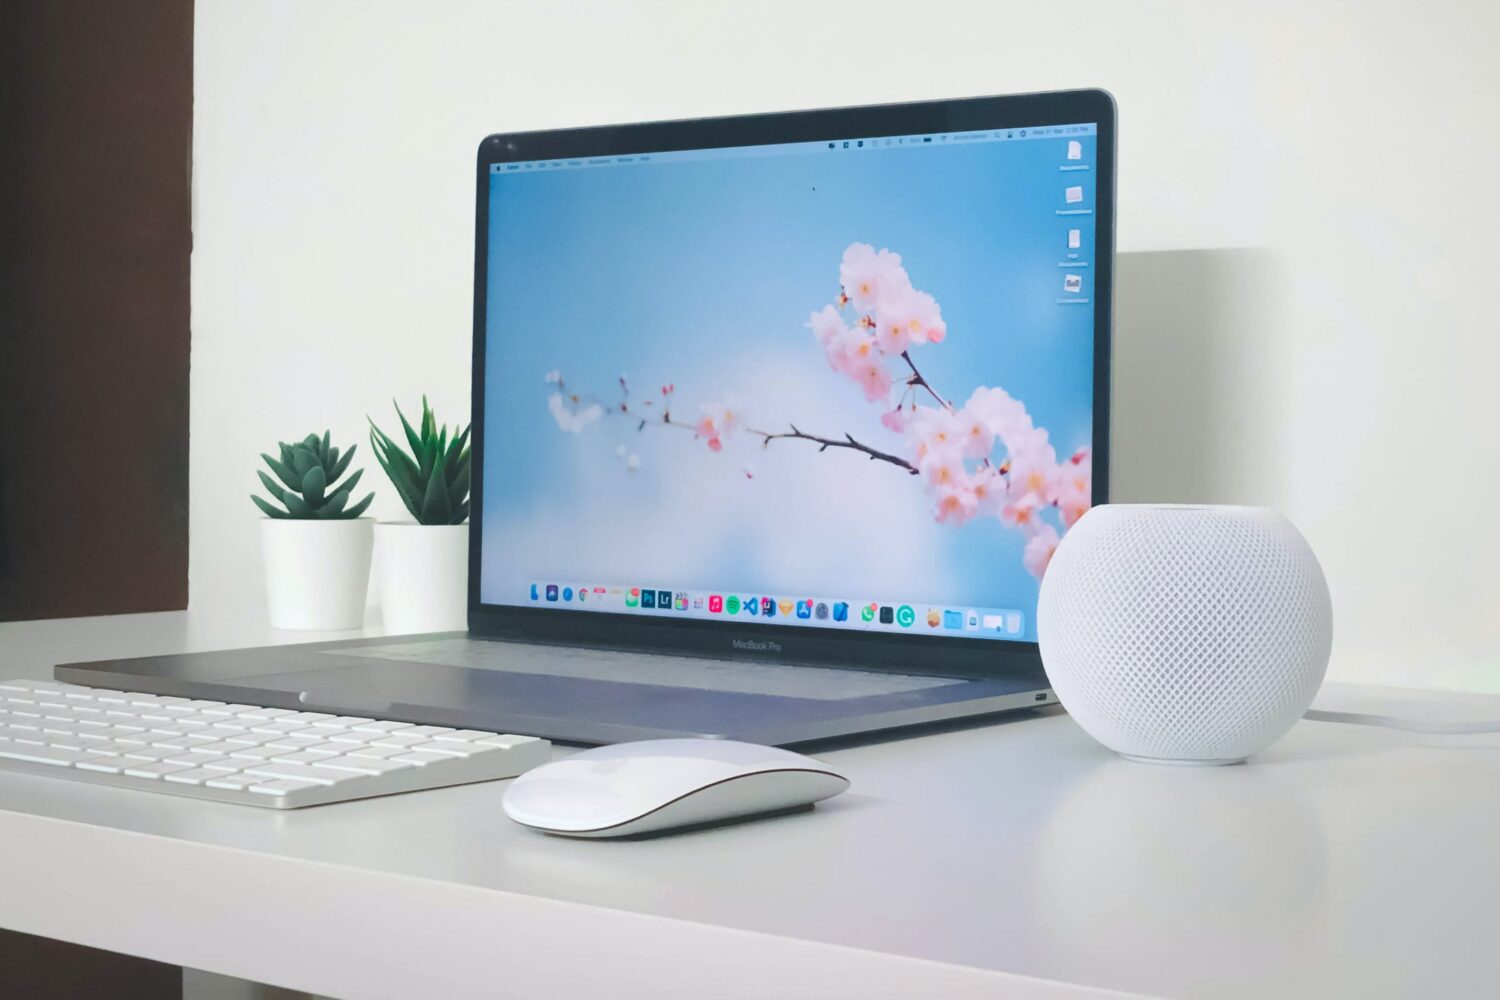 HomePod mini on a work desk next to MacBook Pro and Apple keyboard and mouse